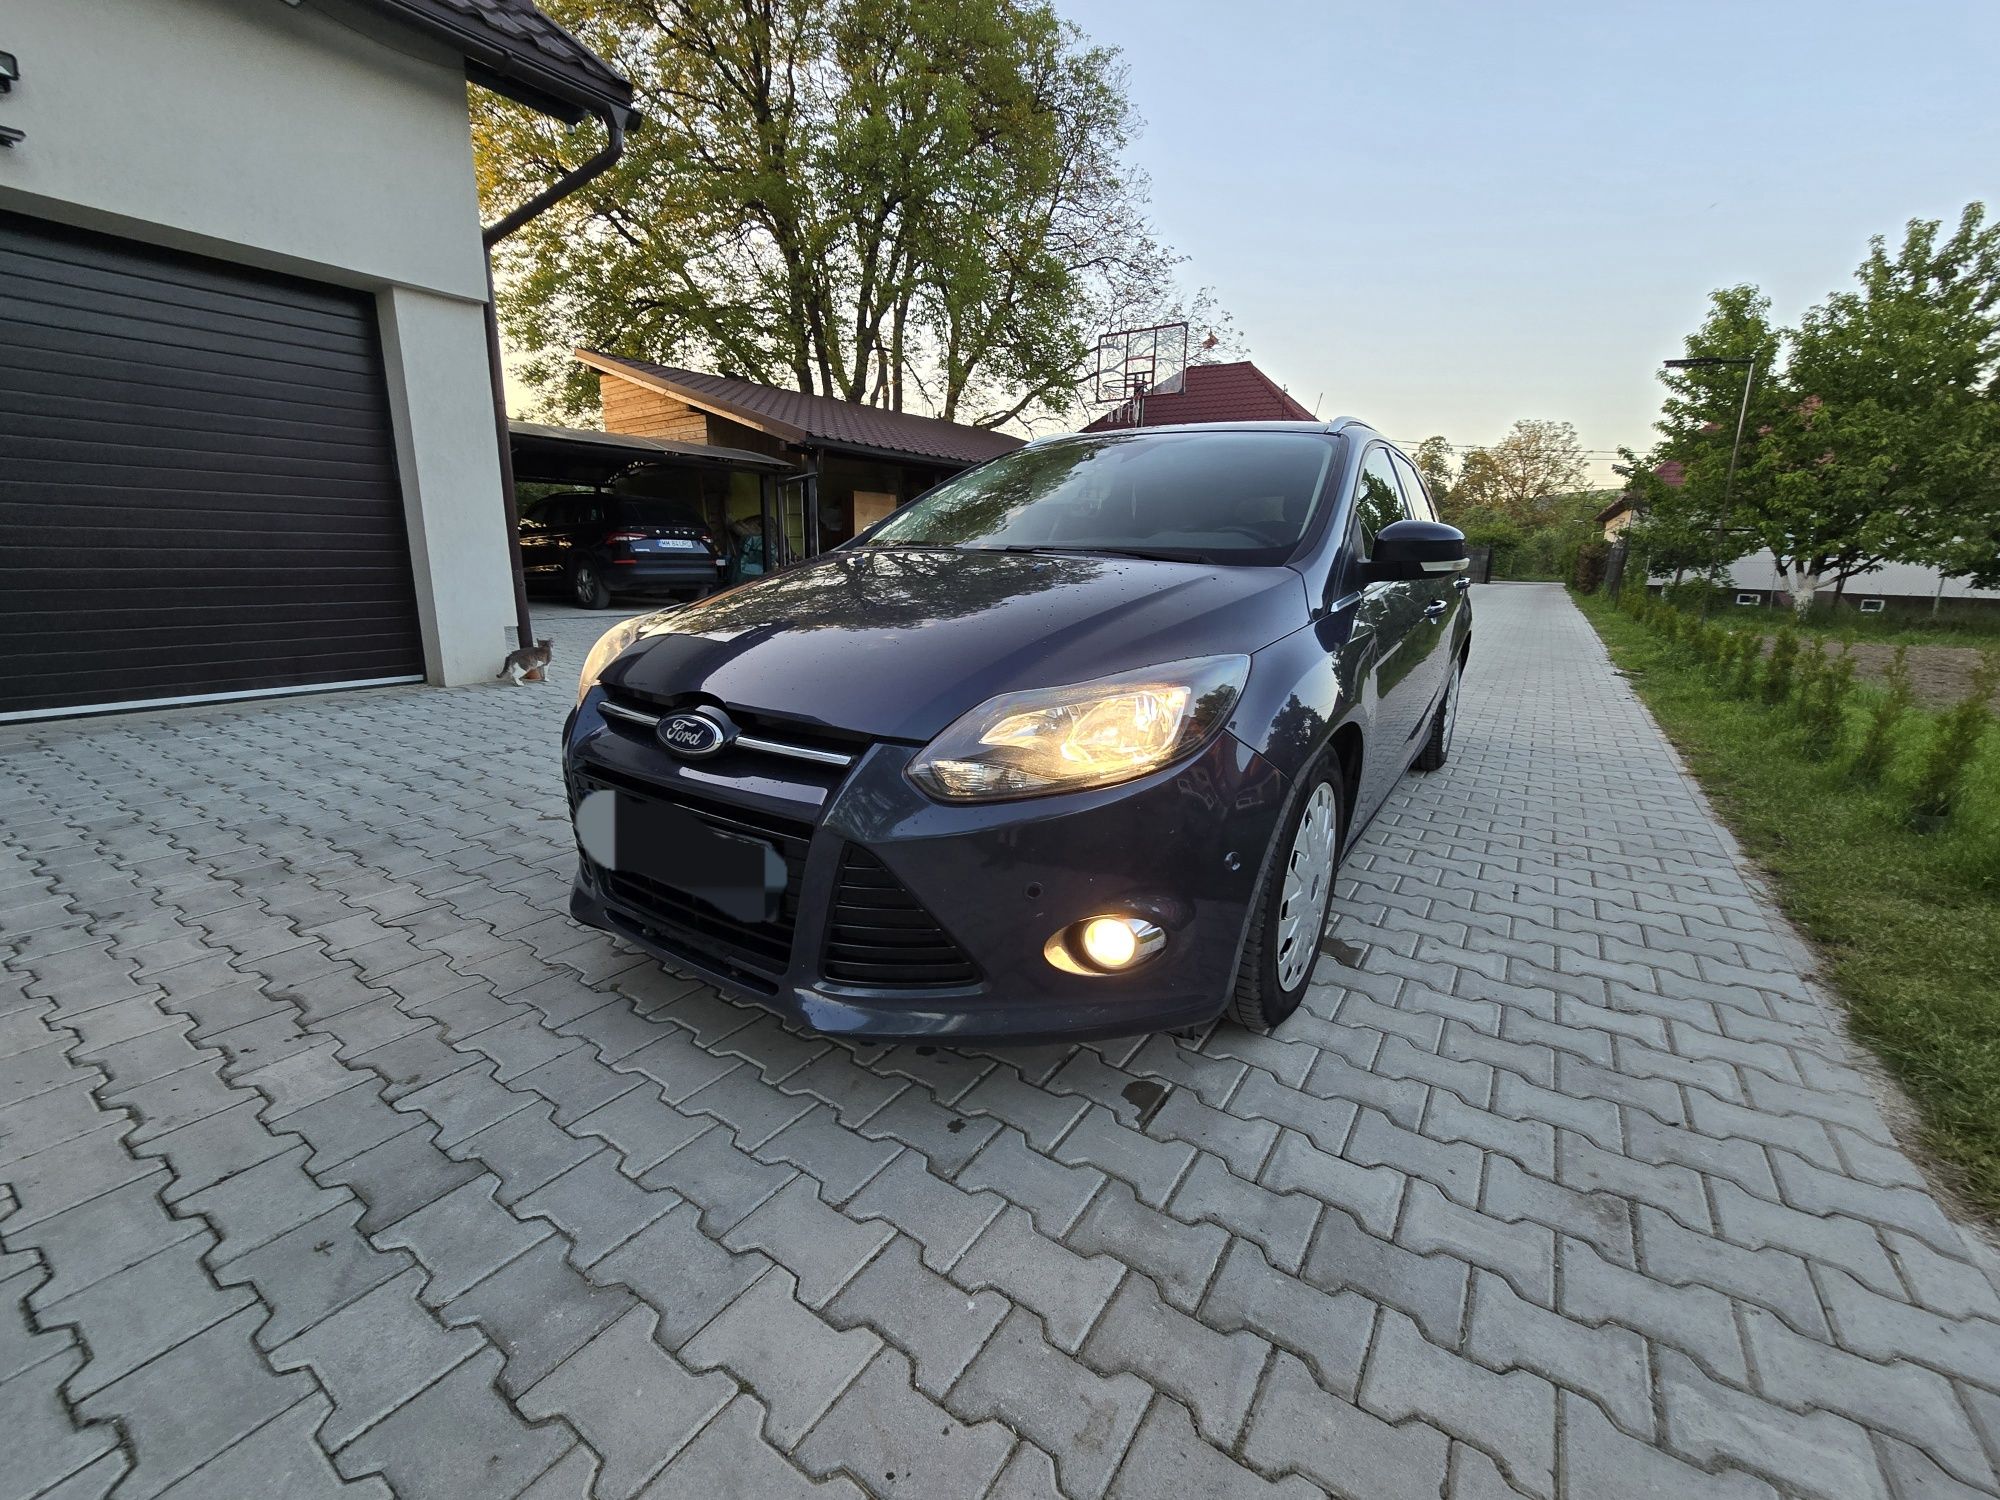 Ford Focus MK3, 1.6 econetic, 2013